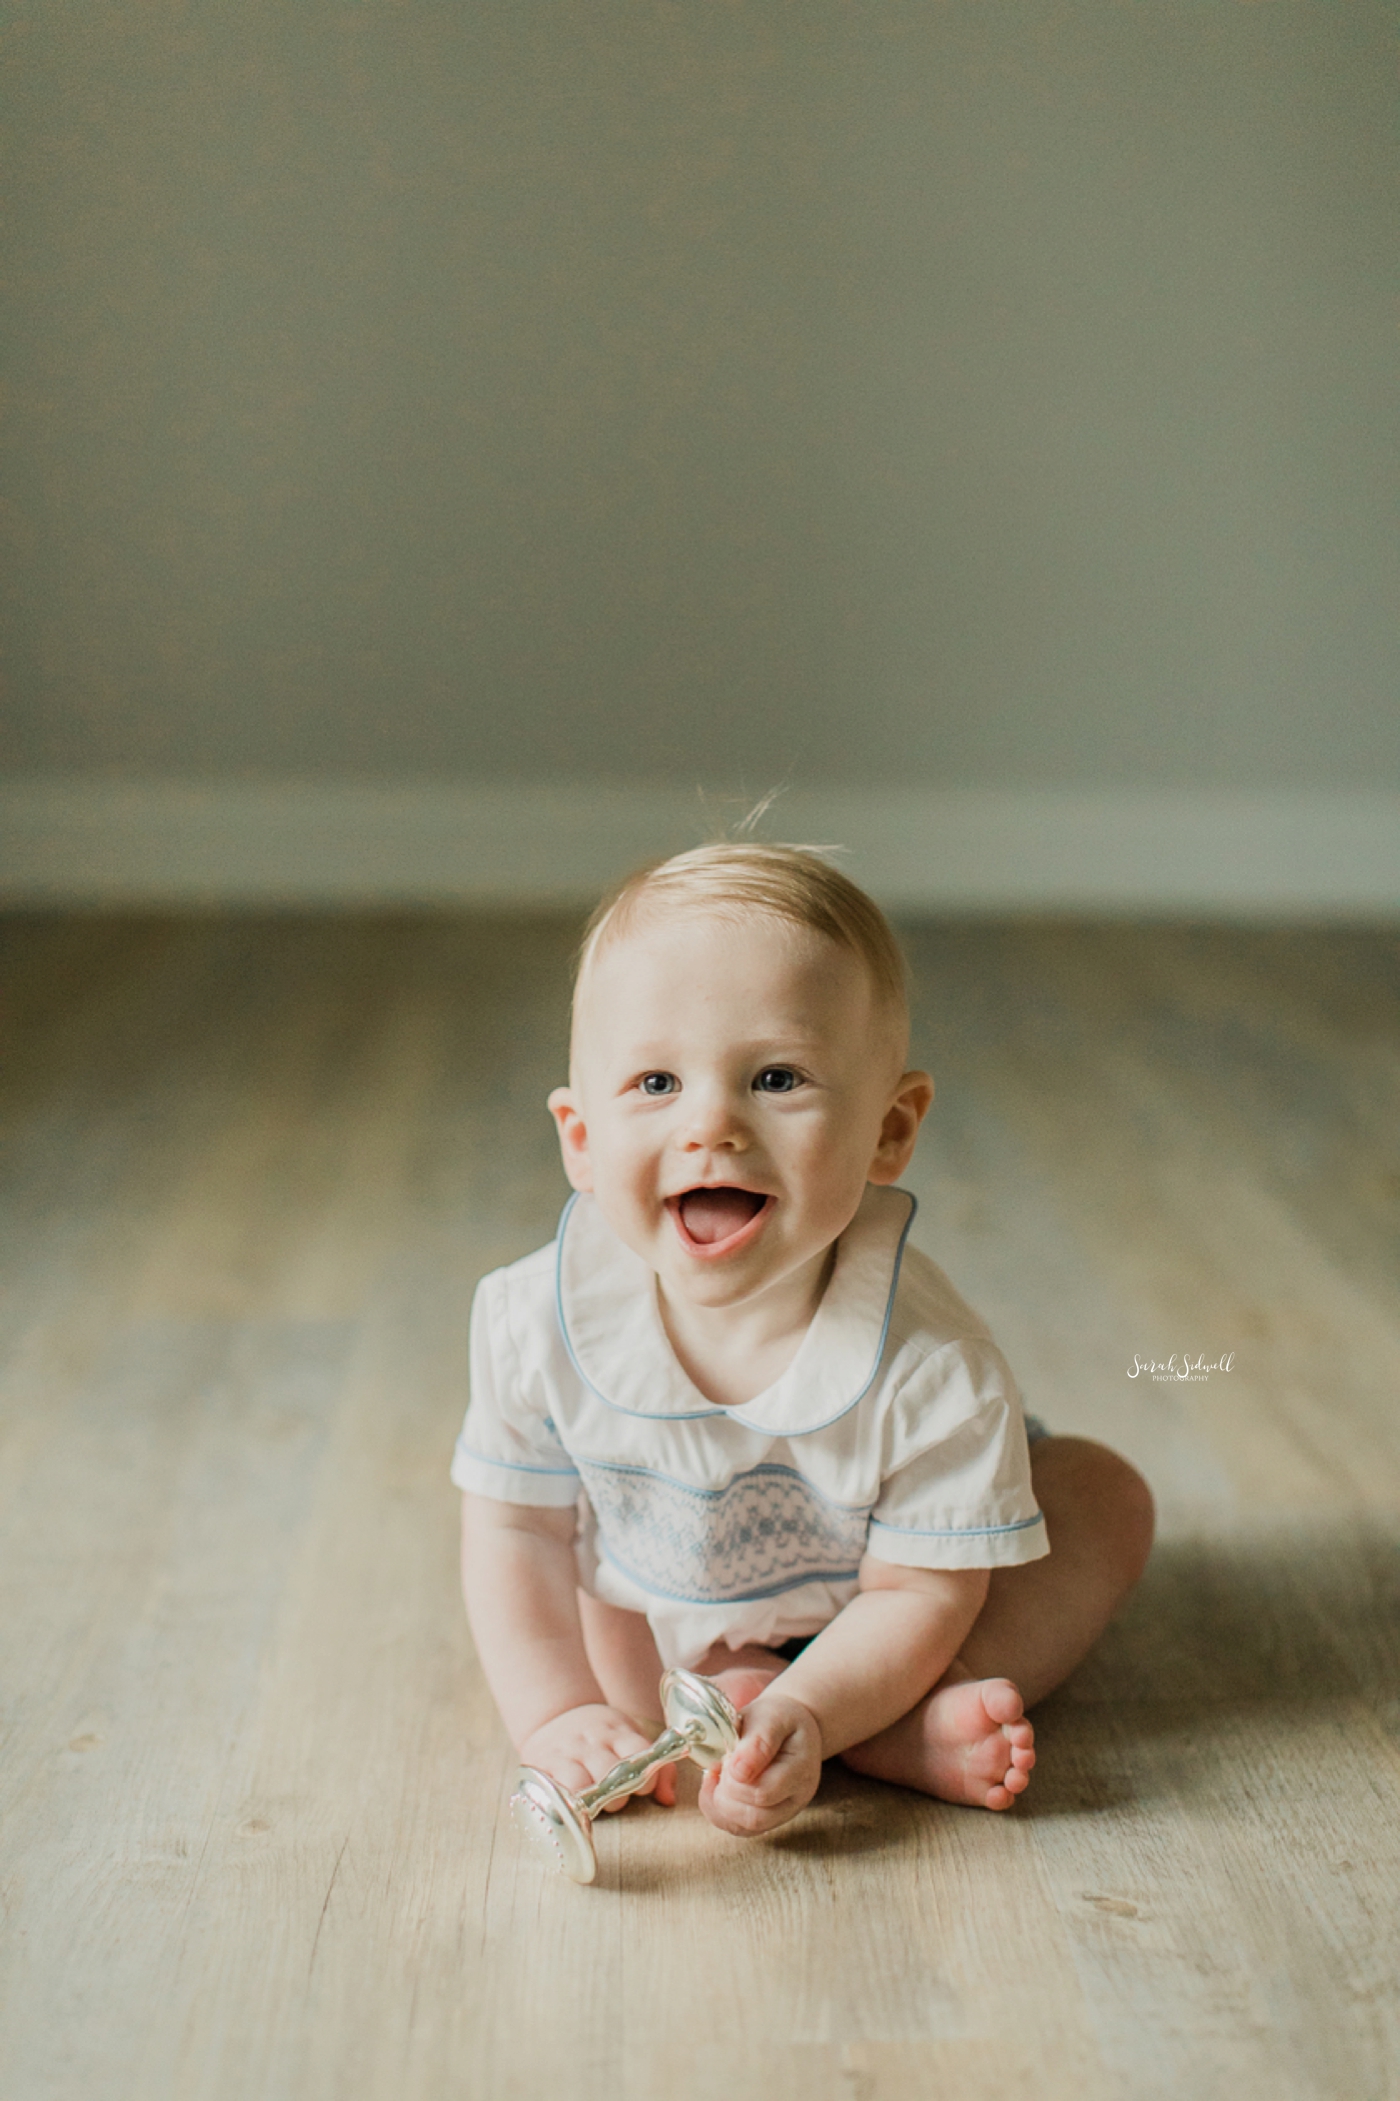 A baby sits up on a wooden floor and smiles. 